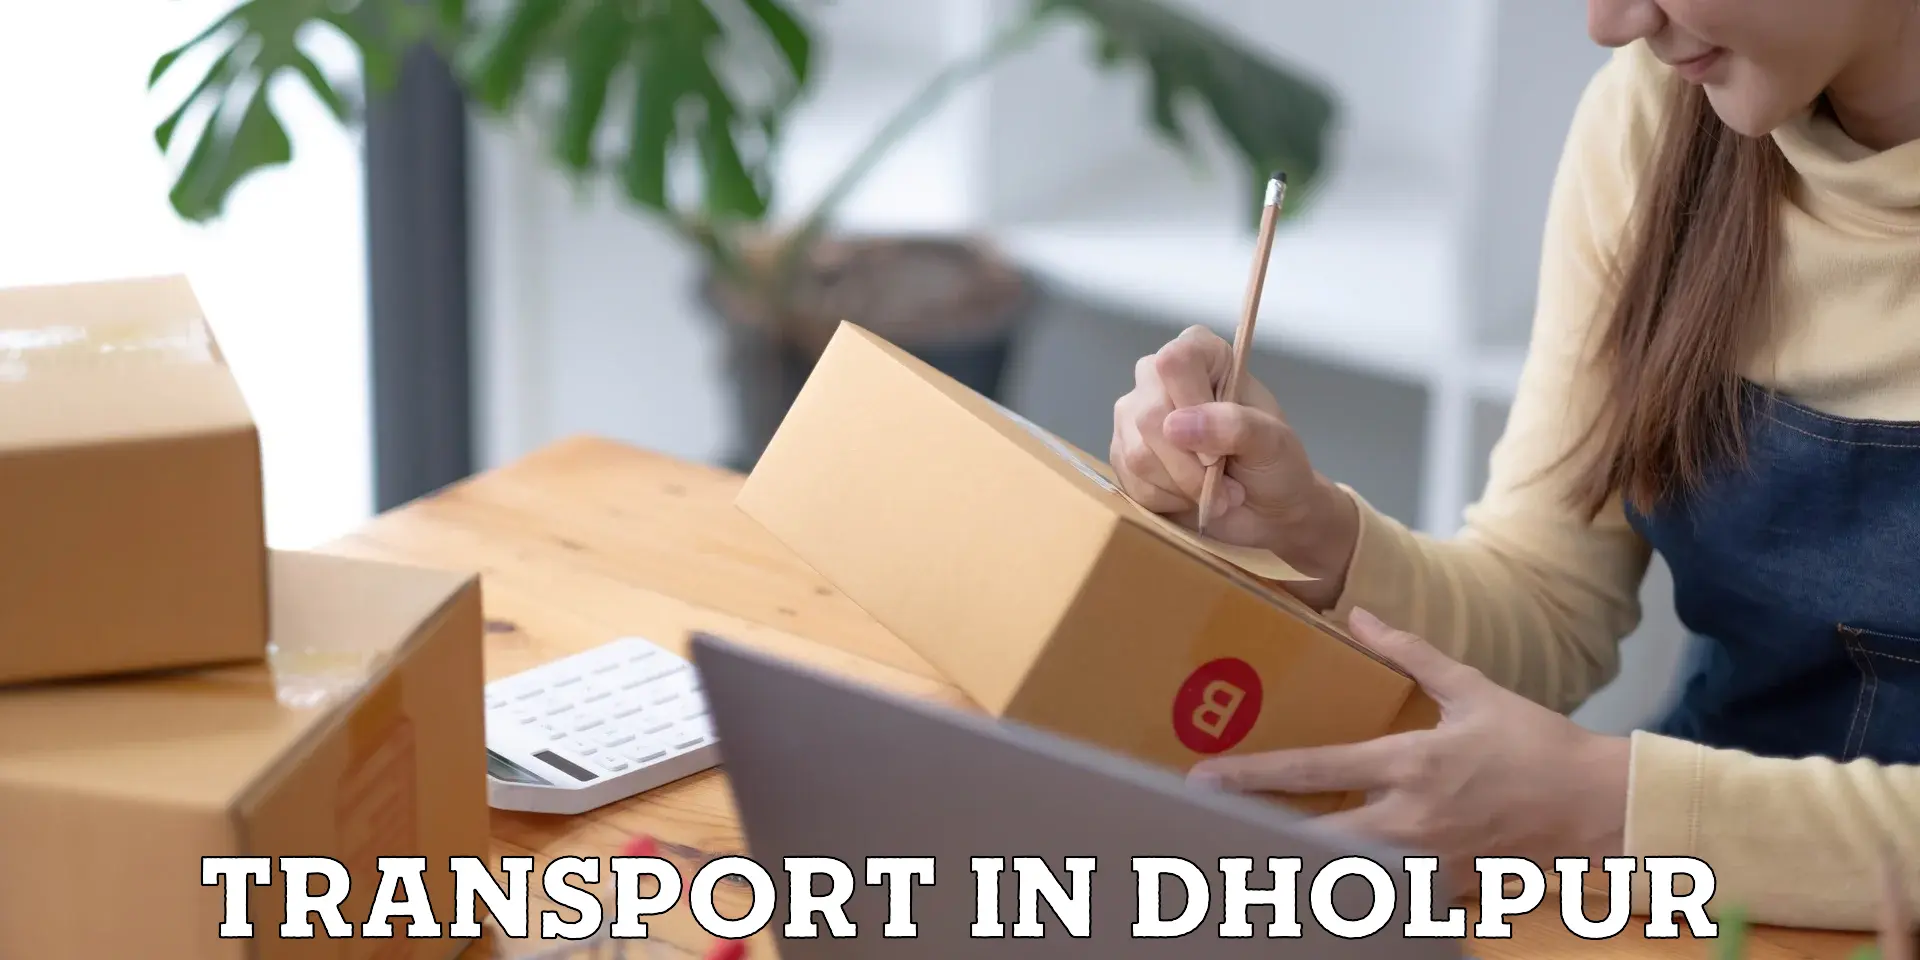 Transport shared services in Dholpur